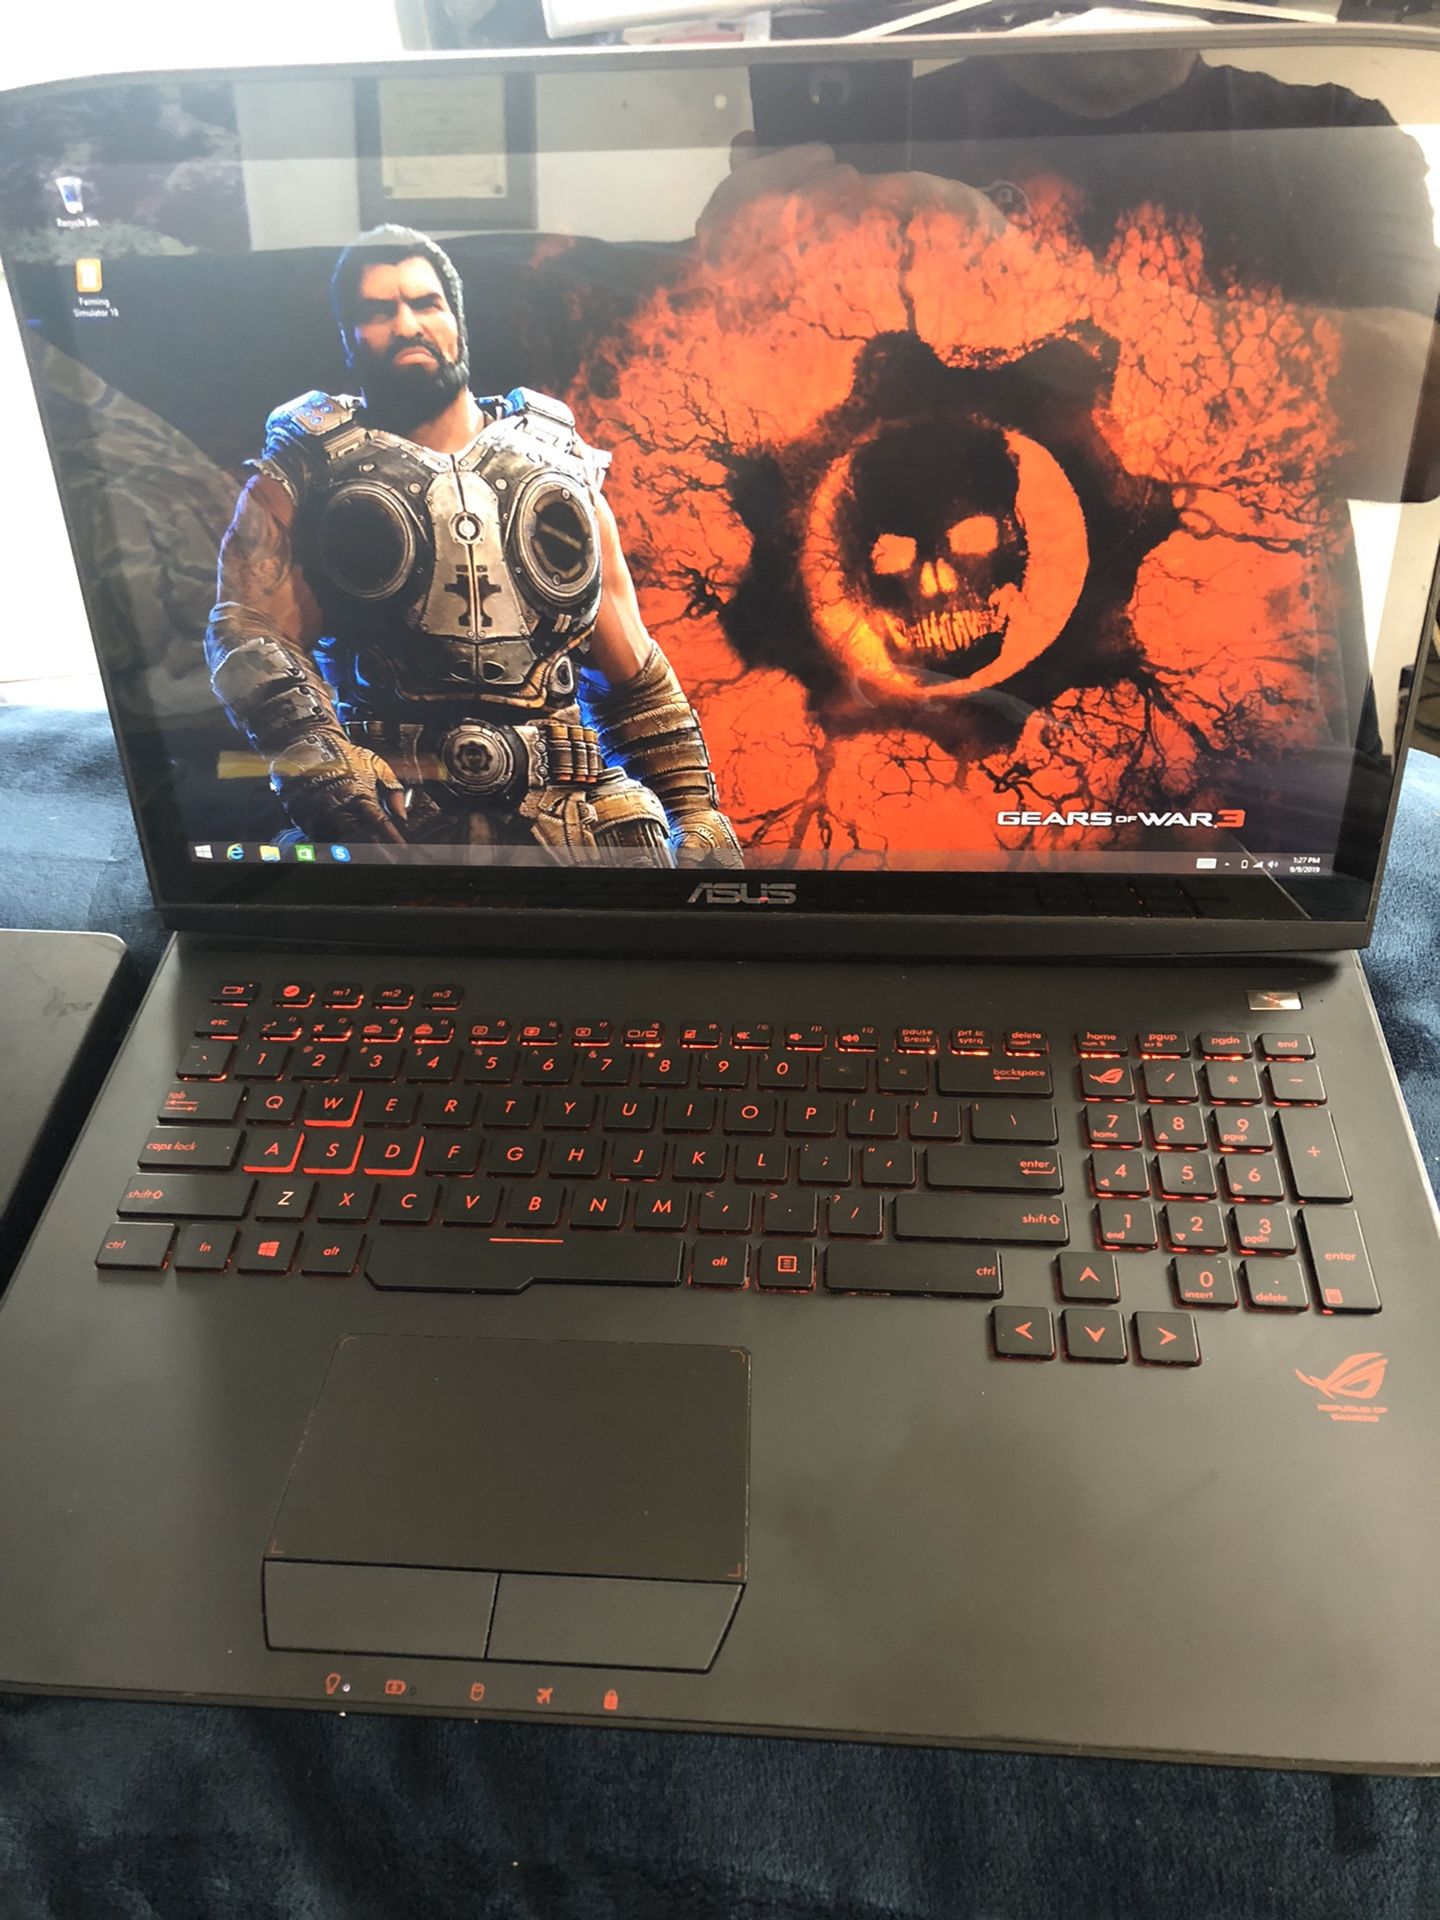 ASUS ROG G751JM 17.3in. (1TB, Intel Core i7 Touch Screen 2.5GHz, 8GB Gaming Laptop sale